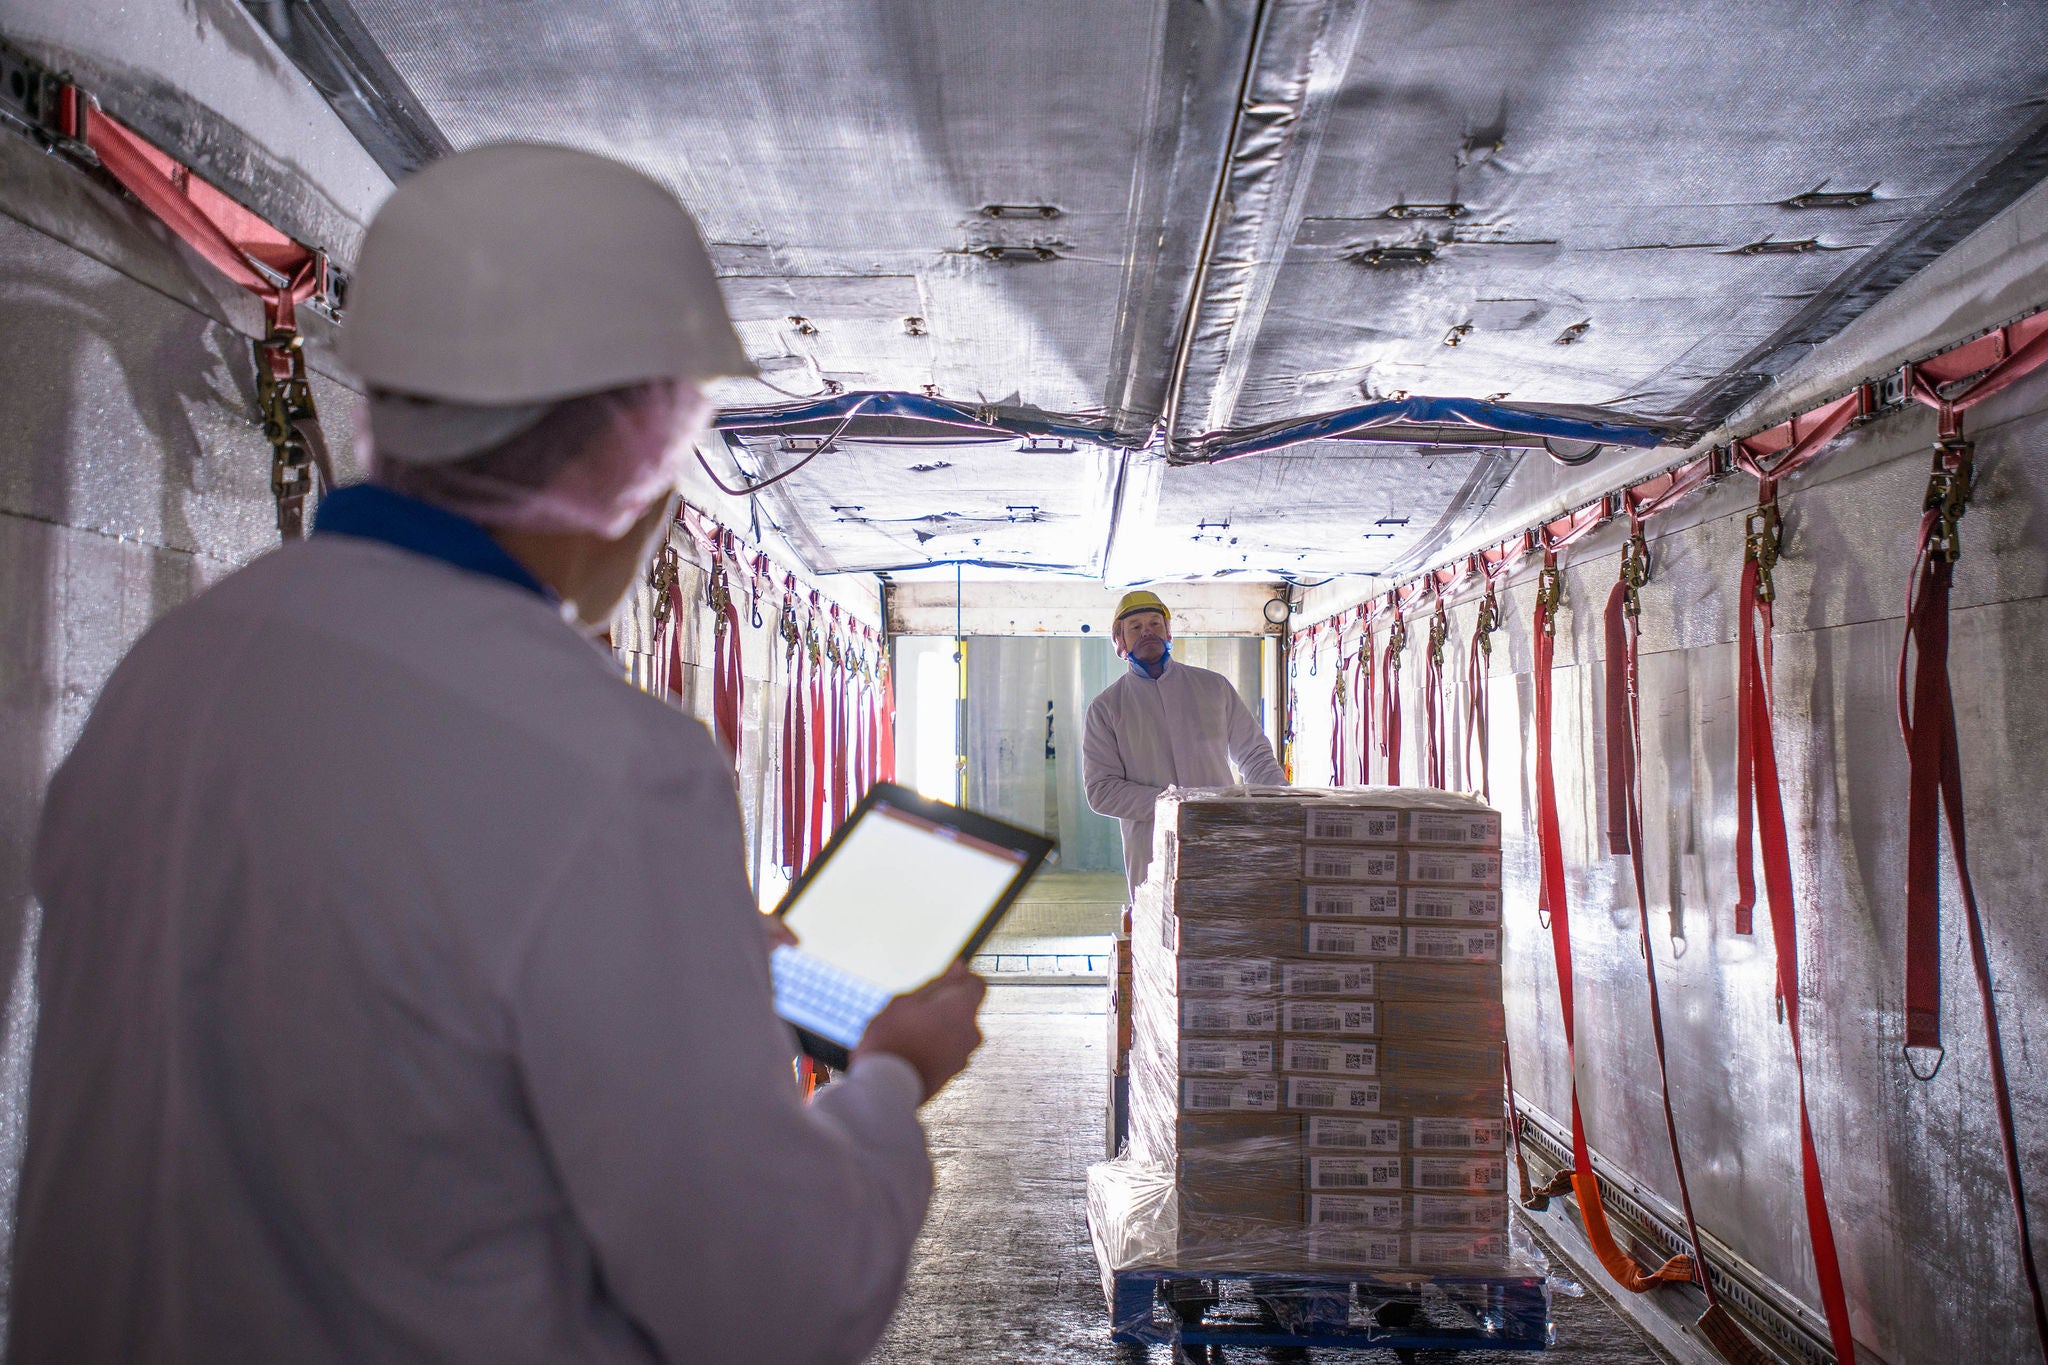 Worker checking products into freezer truck of food factory with tablet

Image downloaded by Charlie Brewer at 16:08 on the 18/08/18